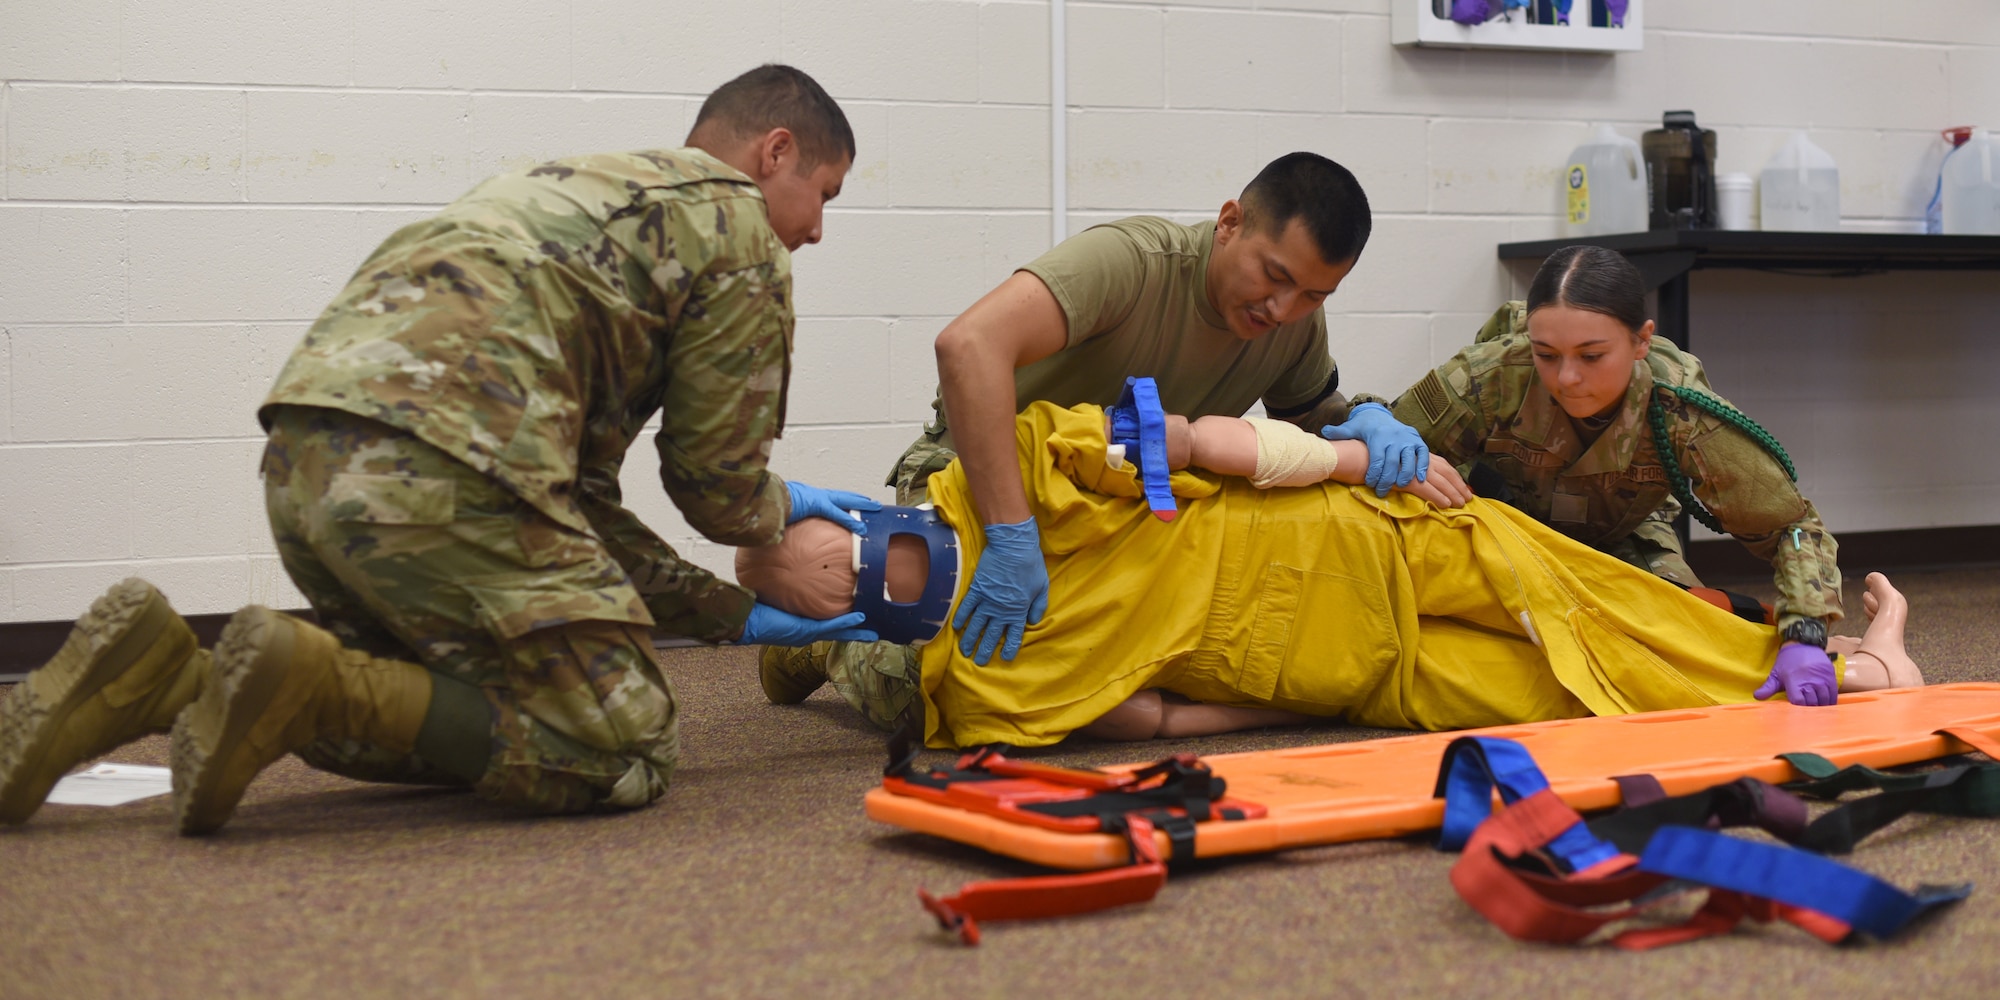 Joint service students assigned to the 312th Training Squadron, inspect the back of a simulated victim for injury, during an Emergency Medical Responder psychomotor skills evaluation at Goodfellow Air Force Base, Texas, May 6, 2022. EMR is a critical training objective at the Louis F. Garland Department of Defense Fire Academy because 90% of operational military emergency calls are EMR related. (U.S. Air Force photo by Senior Airman Abbey Rieves)